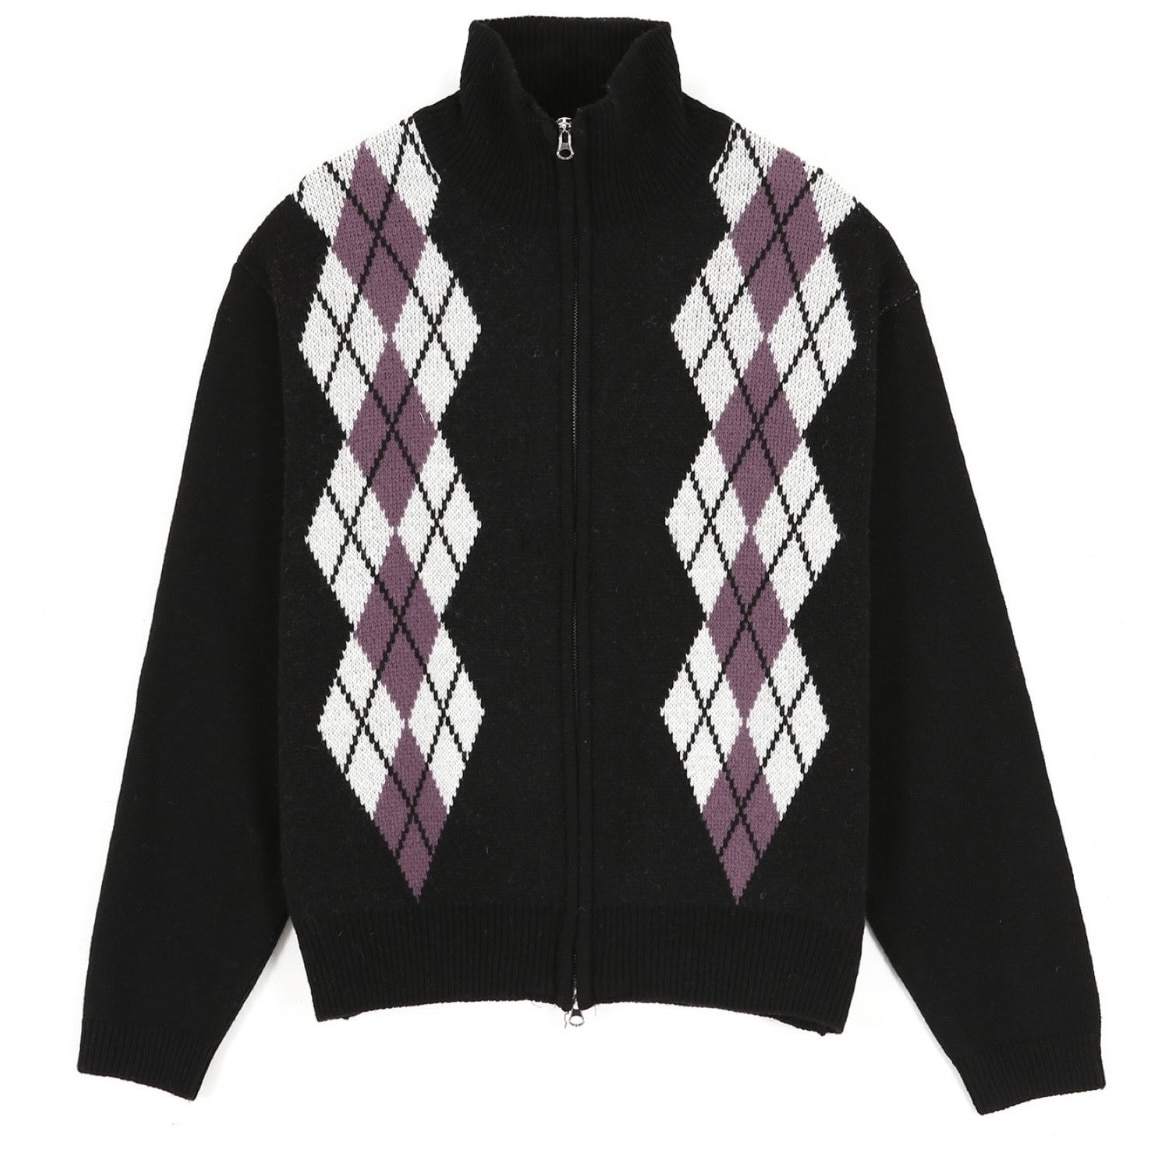 [Wool] Argyle knit sweater (2 color)